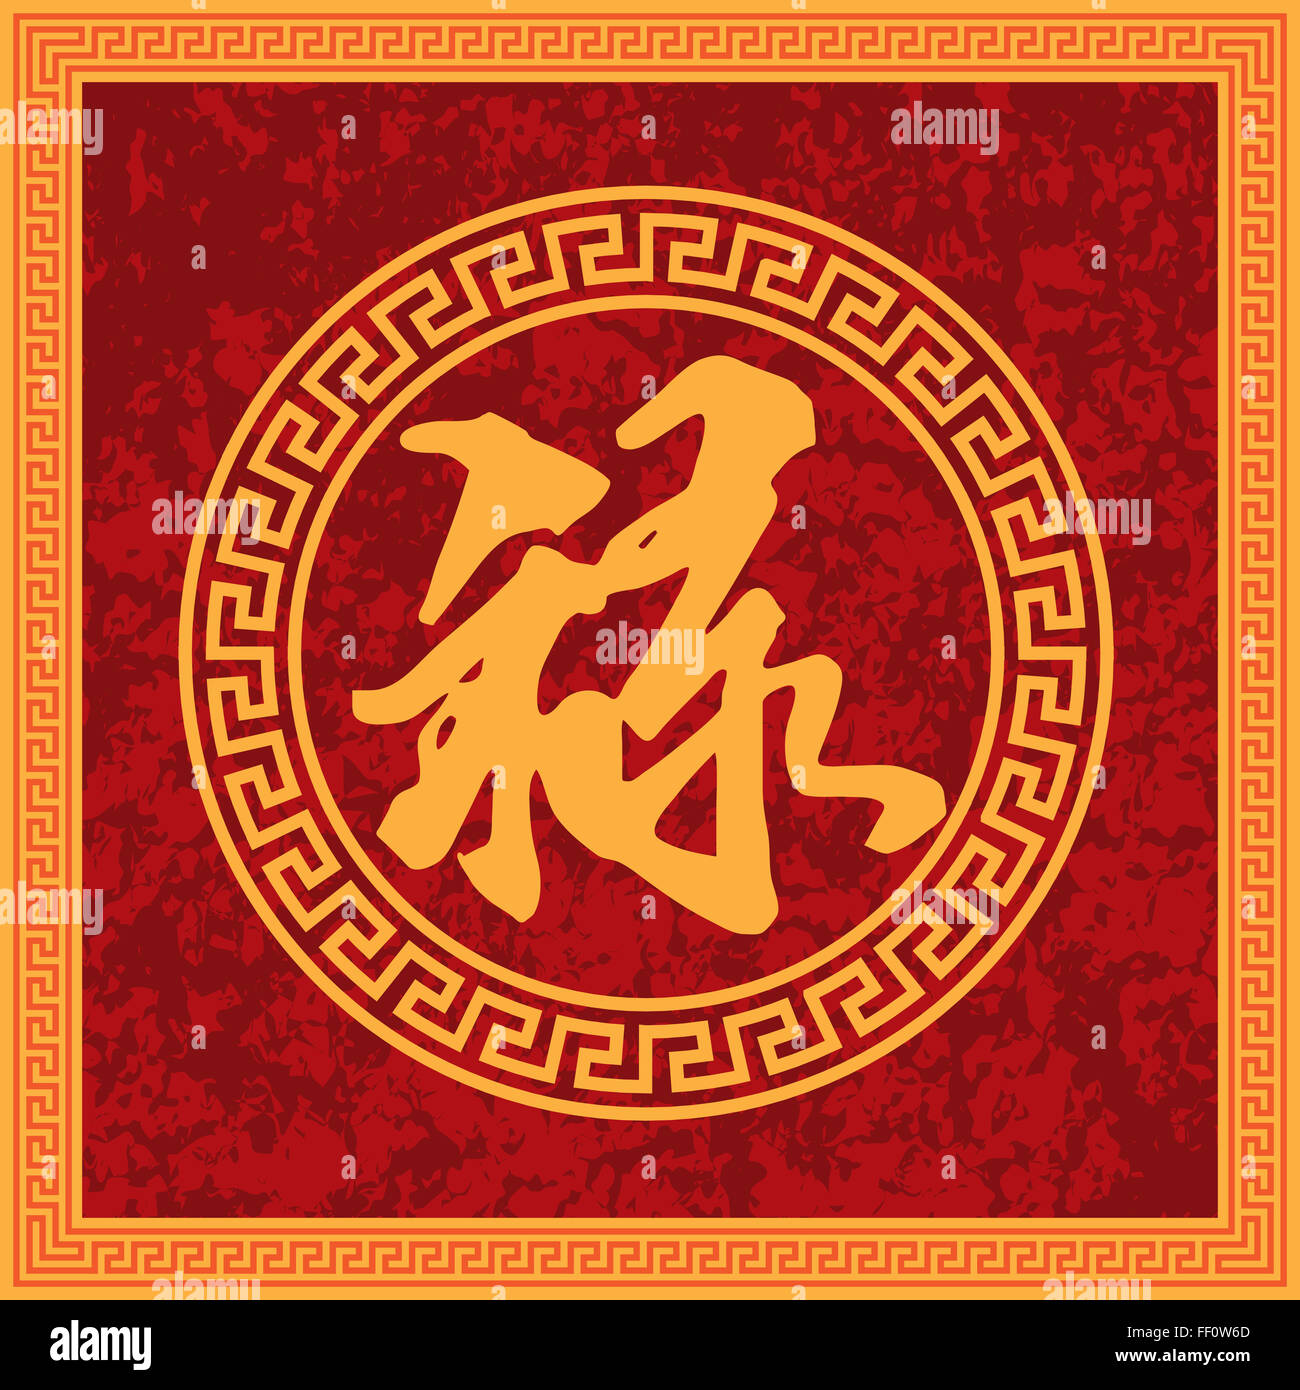 Chinese Prosperity Wealth Calligraphy Text in Square Texture Red Background Frame Illustration Stock Photo